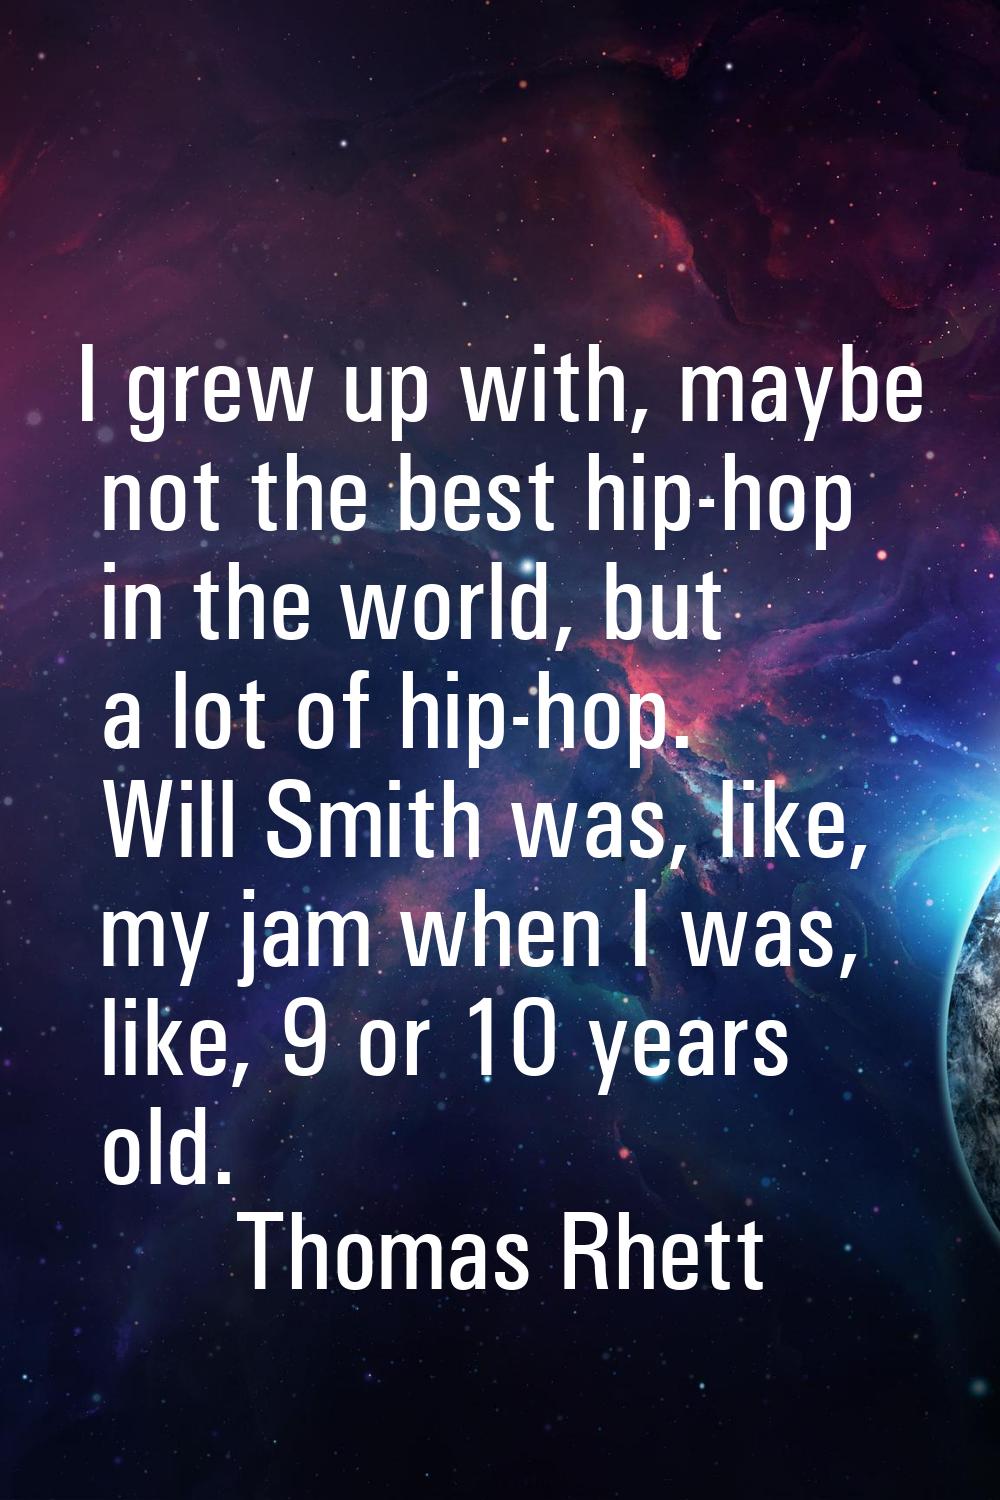 I grew up with, maybe not the best hip-hop in the world, but a lot of hip-hop. Will Smith was, like